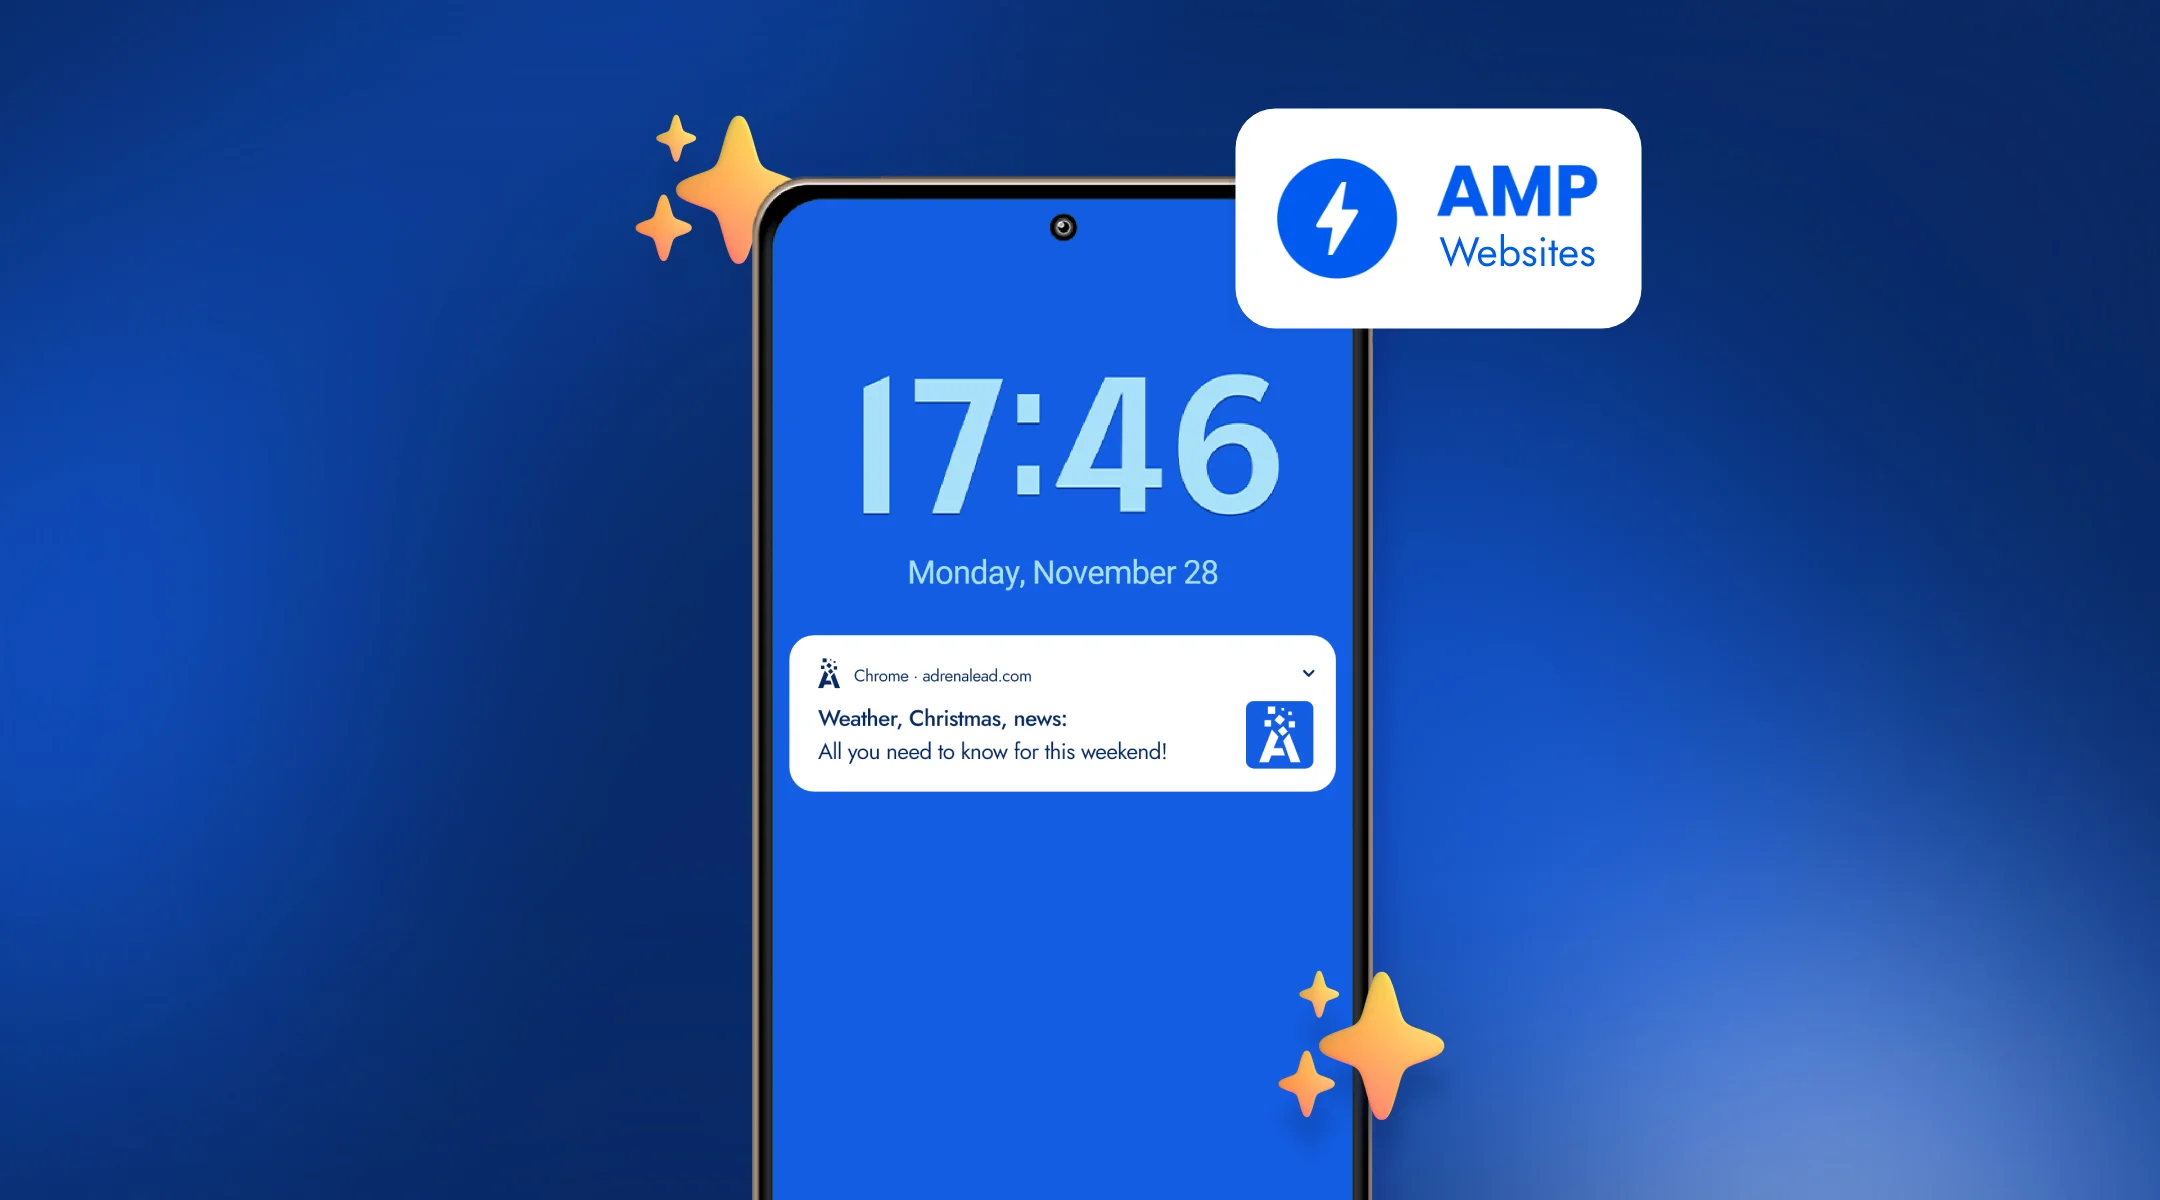 Monetize your AMP sites with Web Push Notification